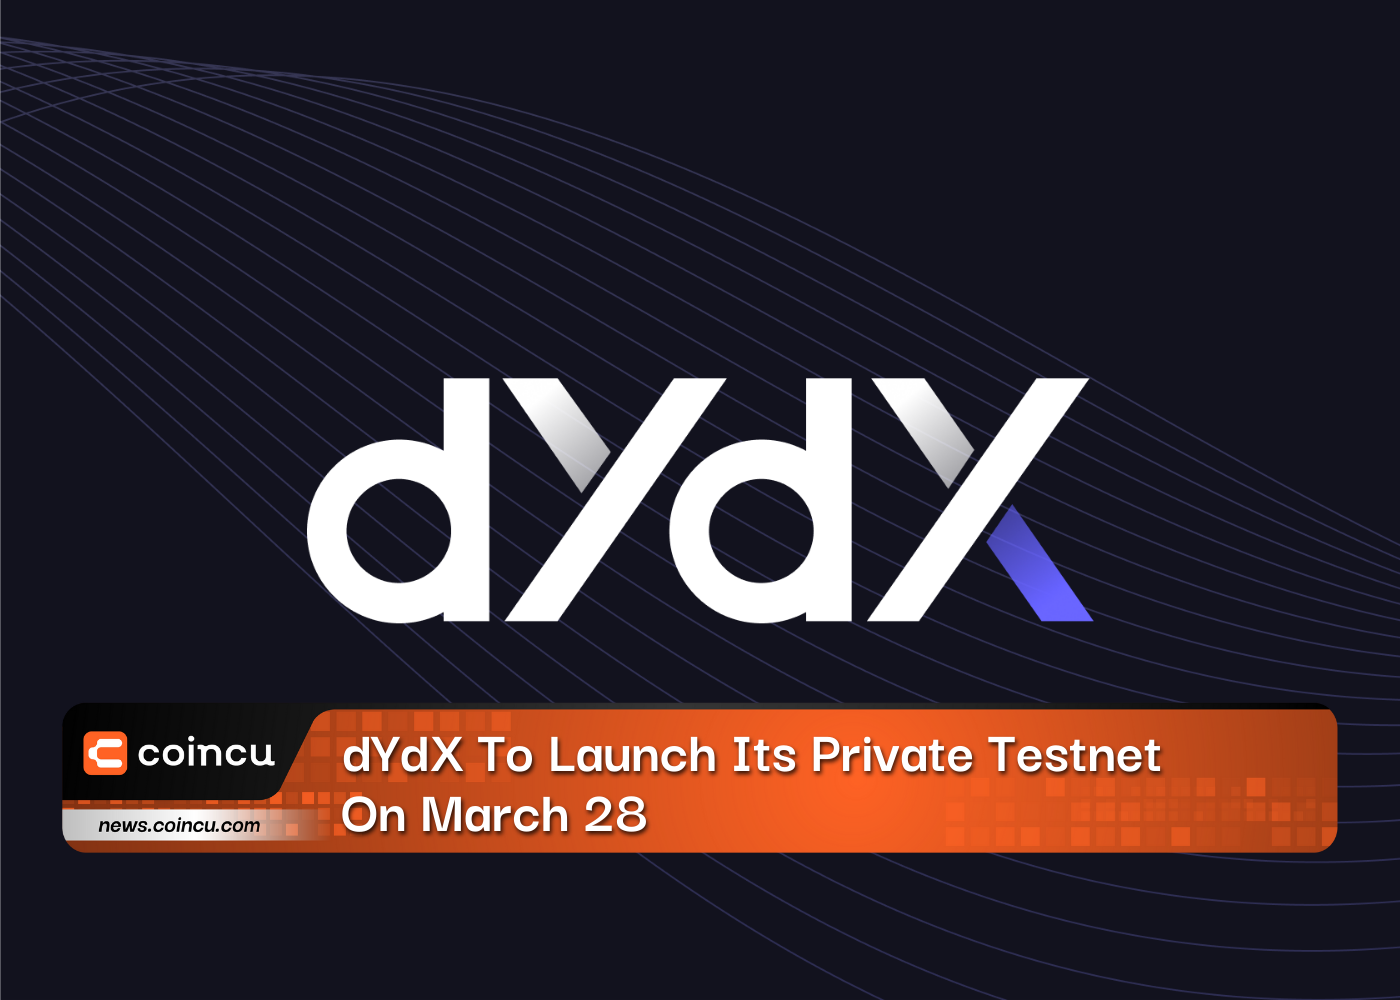 dYdX To Launch Its Private Testnet On March 28